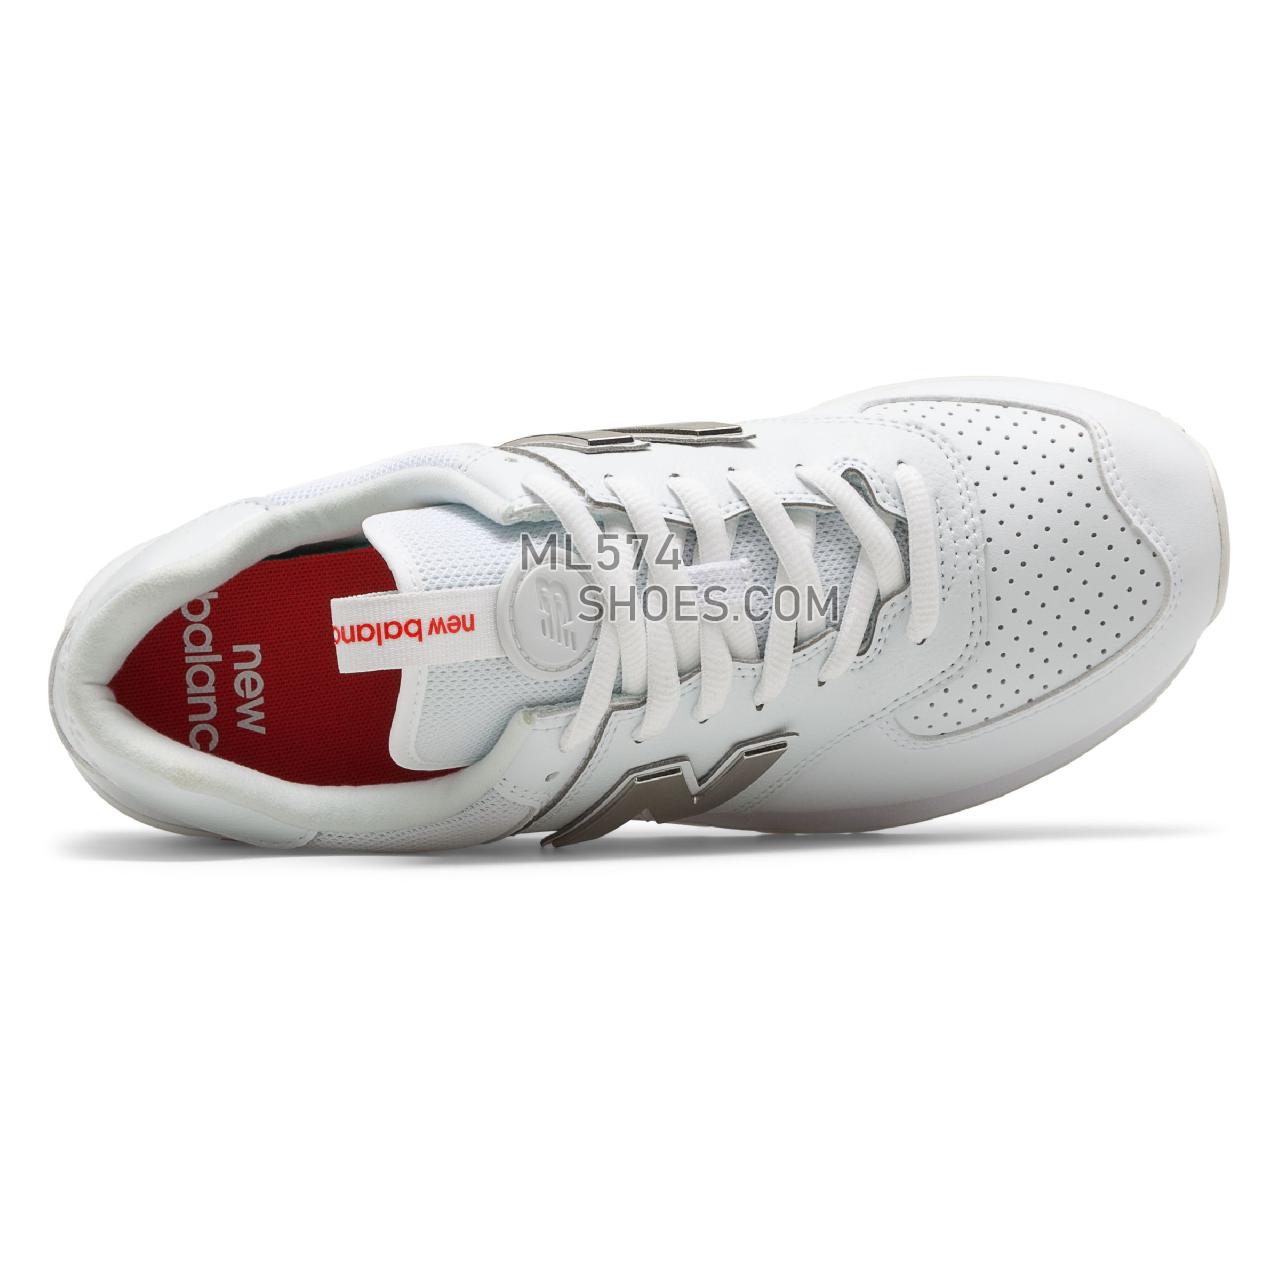 New Balance 574 - Men's Classic Sneakers - White with Neo Flame - ML574SOX